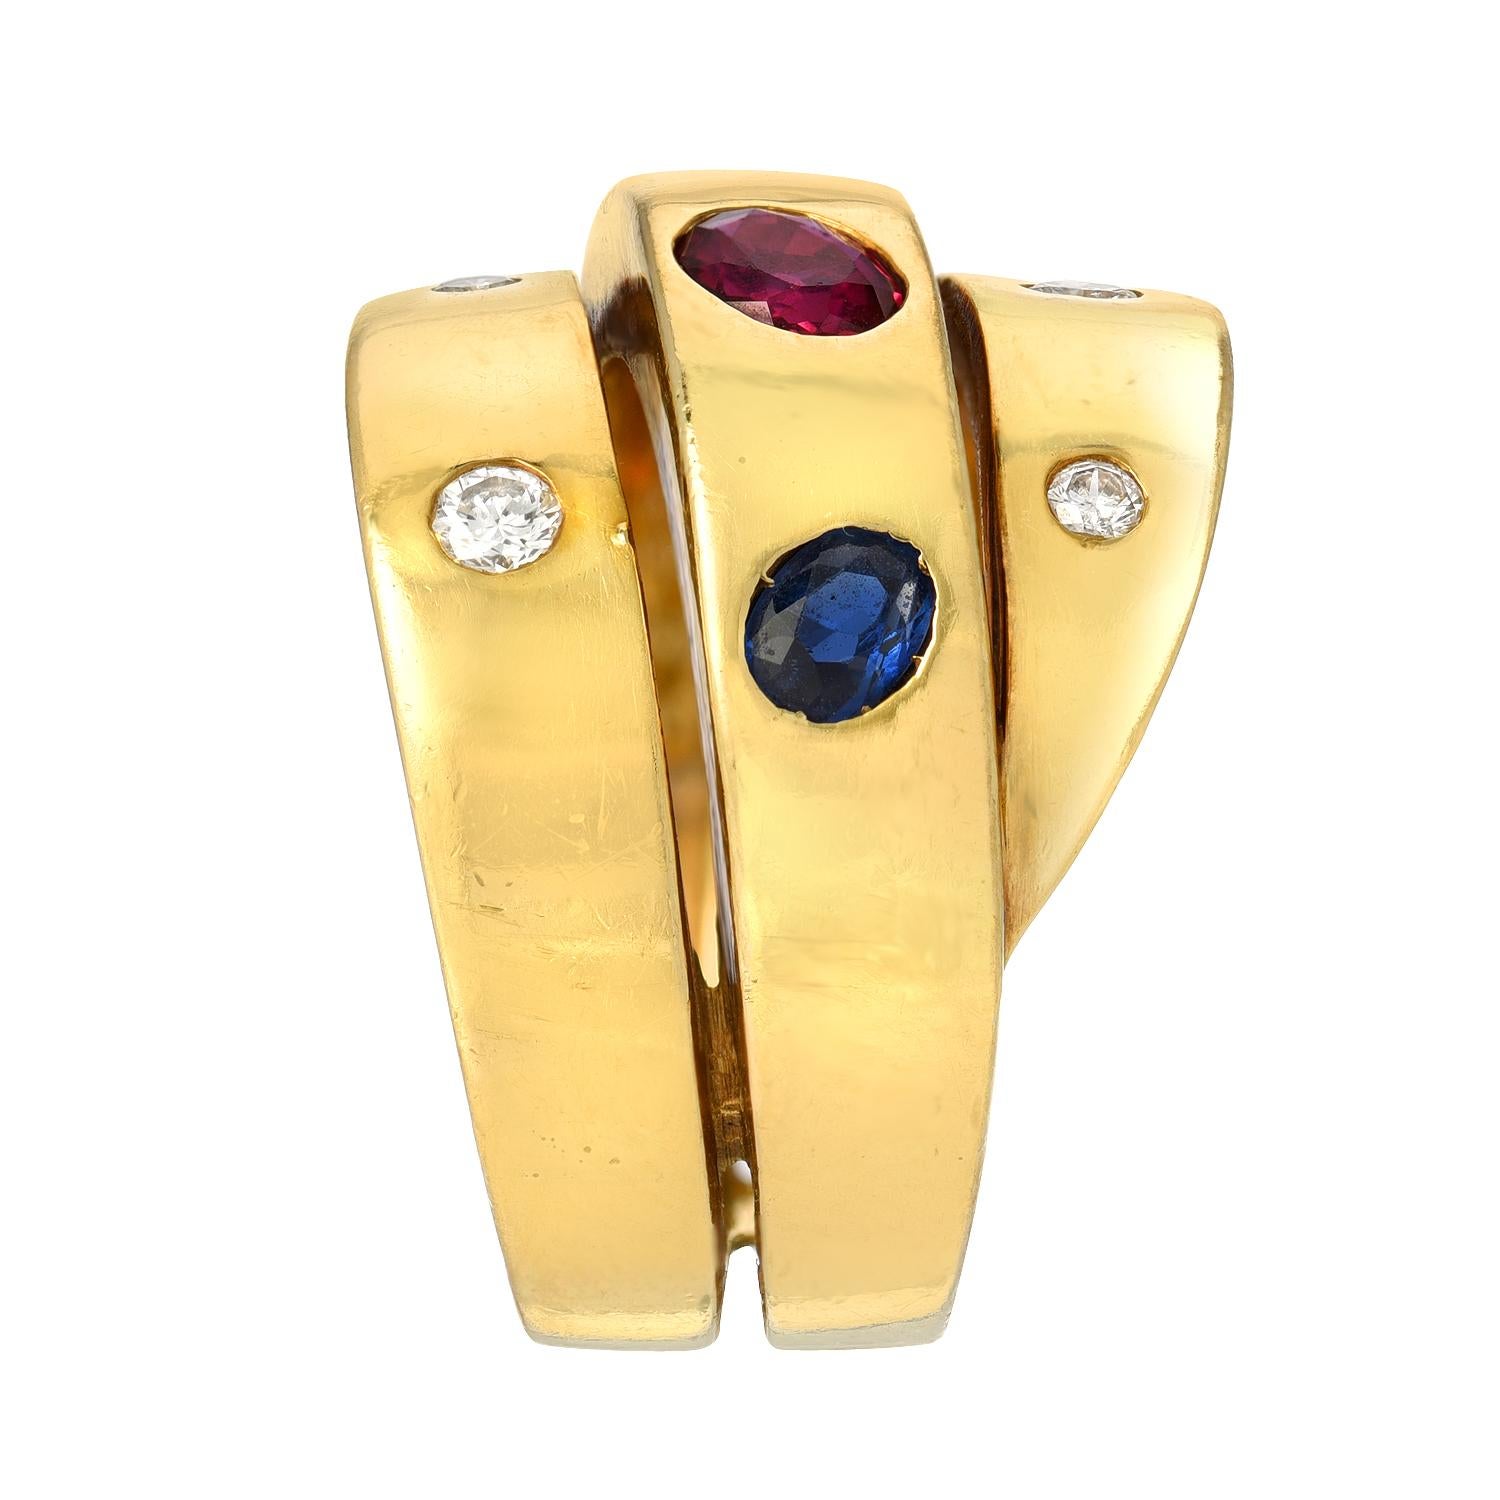 A wrapped design features an oval ruby flanked by oval sapphires on the central element accented with round diamonds totaling approximately 0.15 carat mounted in 18 karat yellow gold, stamped with VCA makers mark, B 5308 63.
Size/Dimensions: US ring